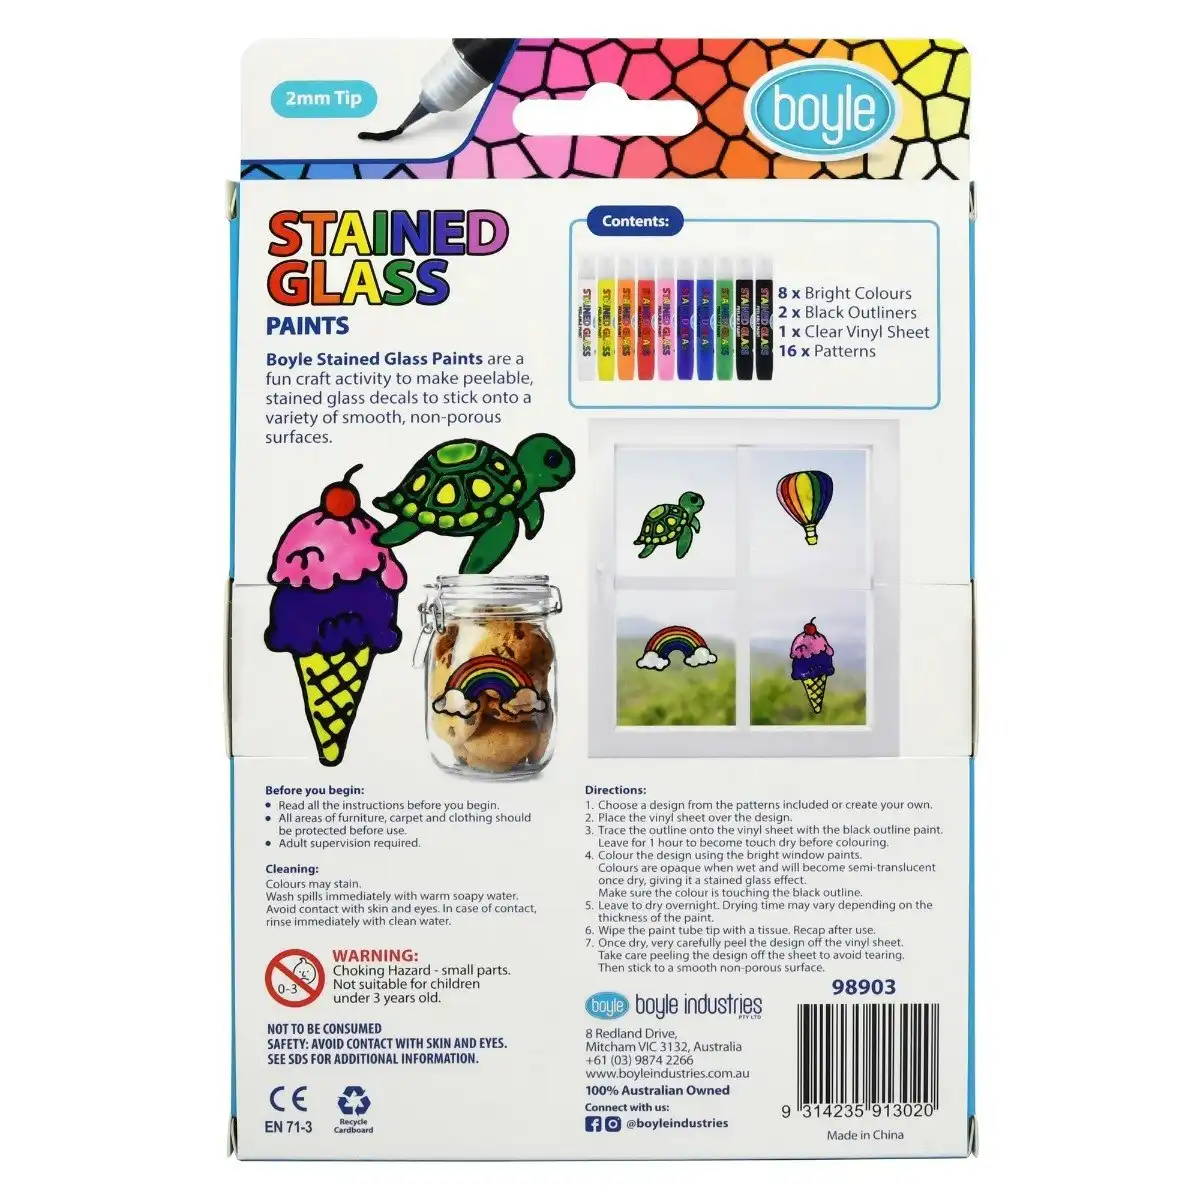 10PK Boyle Stained Glass Peelable Drawing Paints Art/Craft Kids/Children 3y+